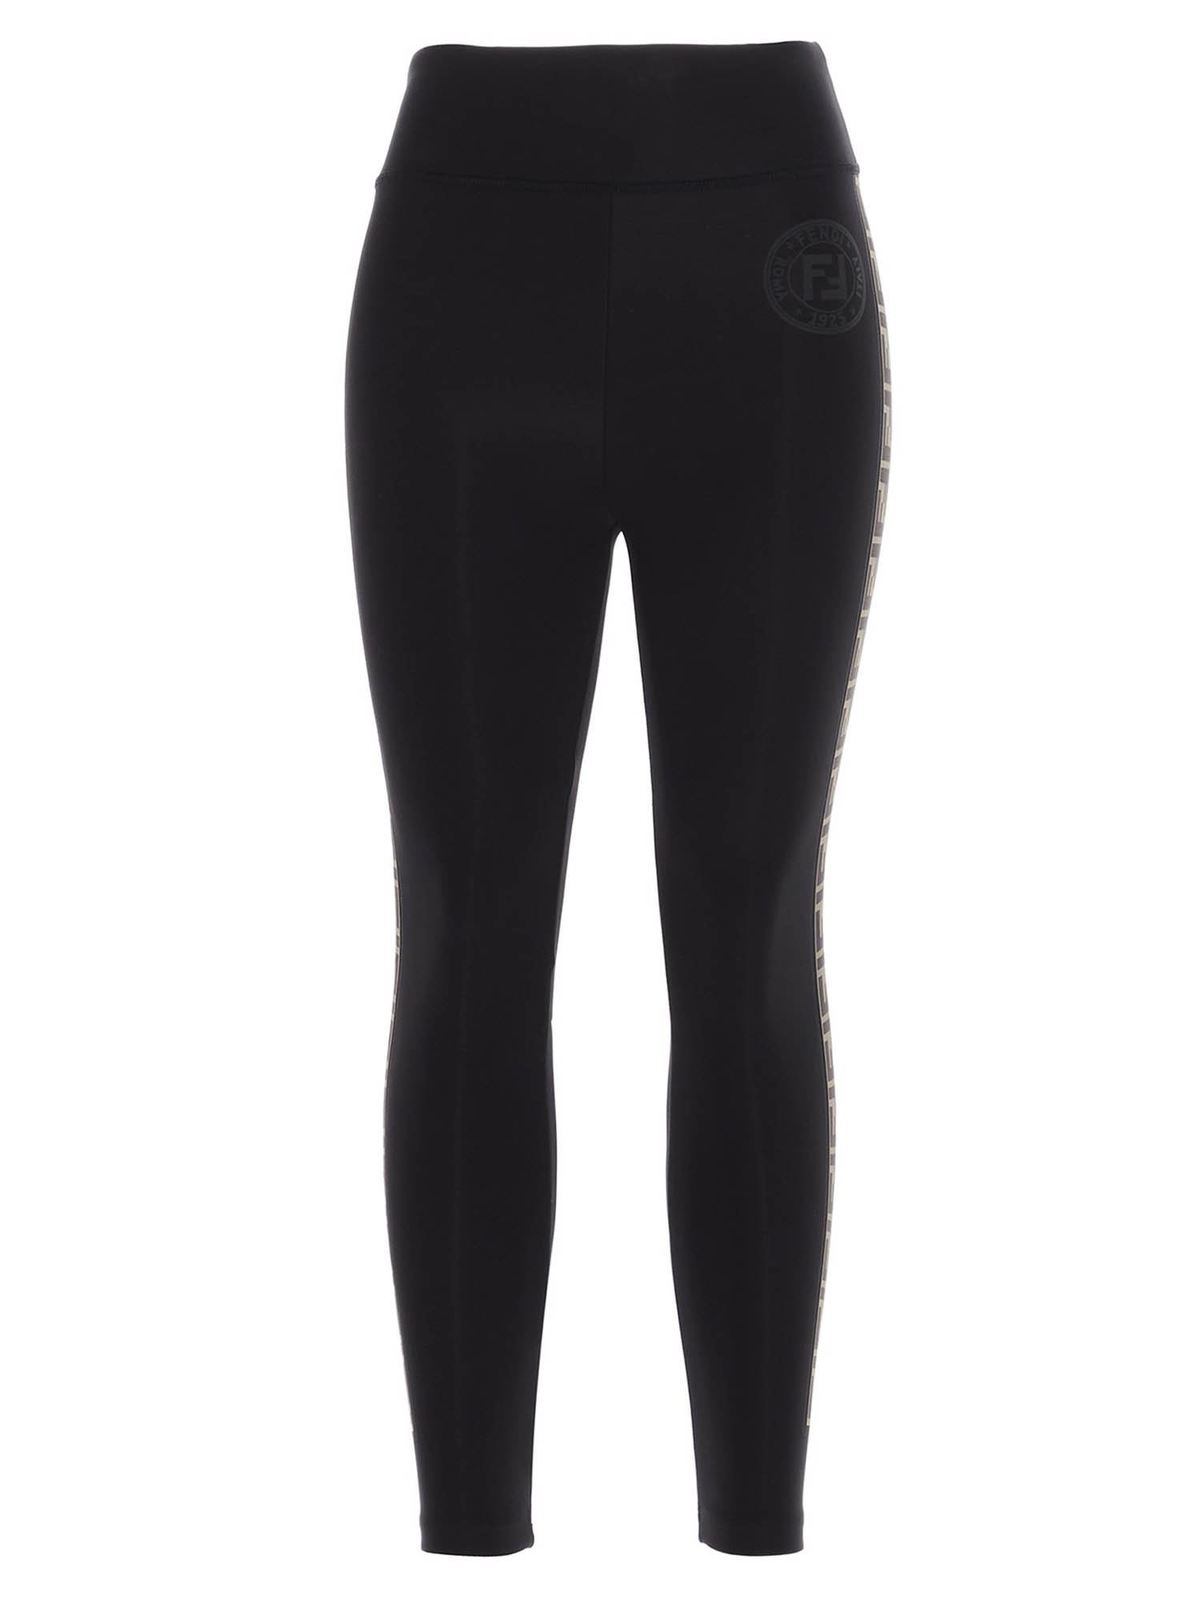 Stretch leggins with branded bands